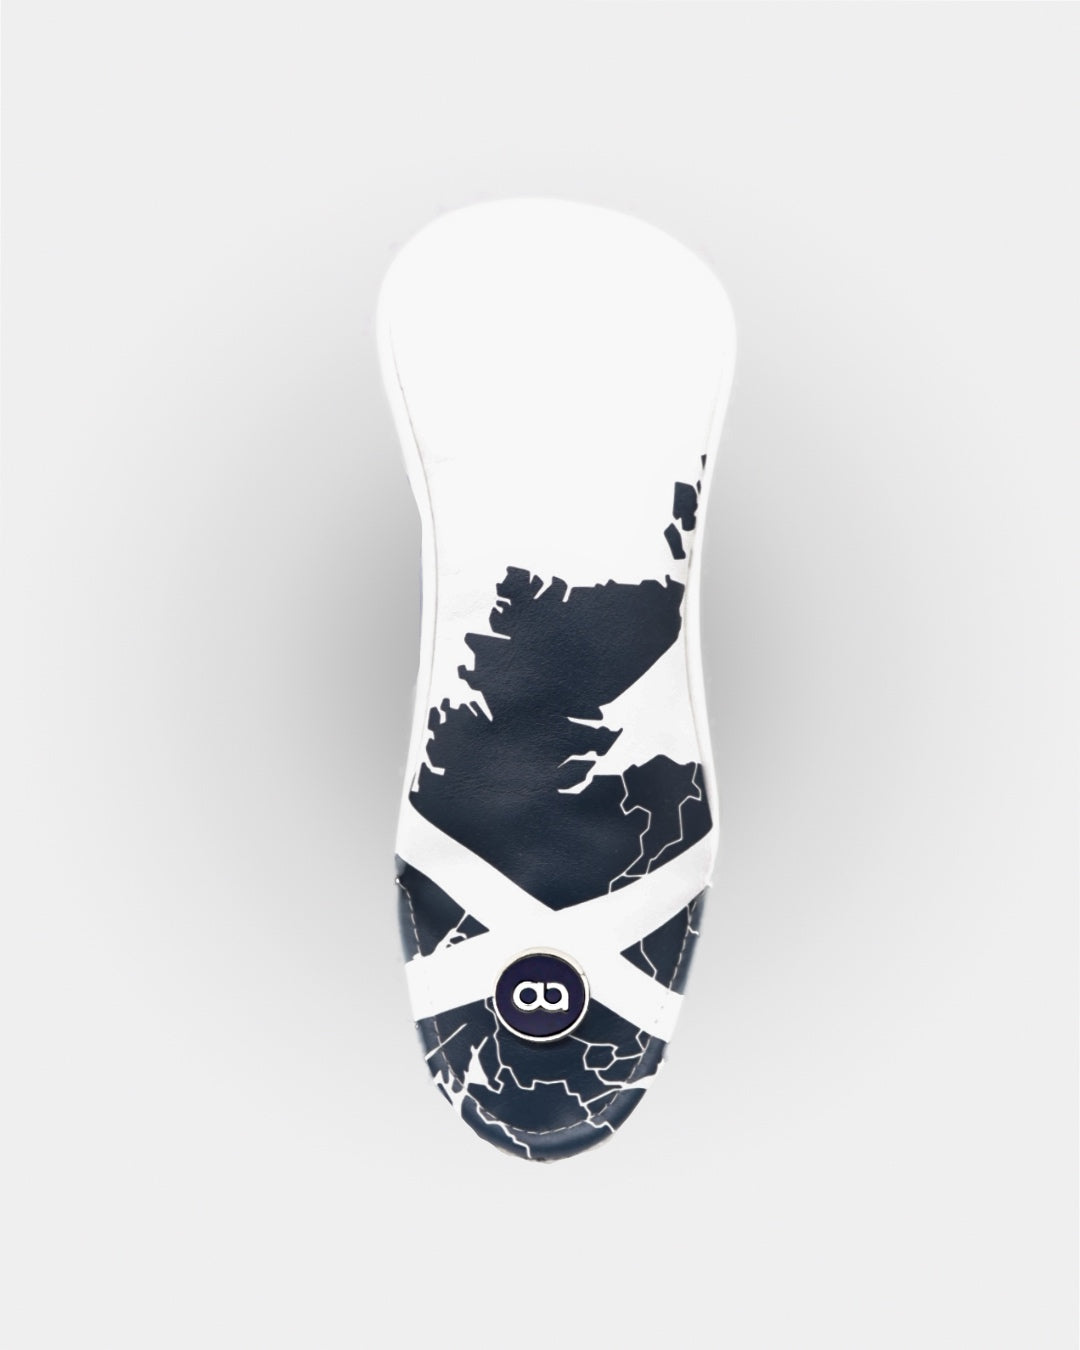 Scotland white and navy blue leather fairway wood headcover by David Alexander